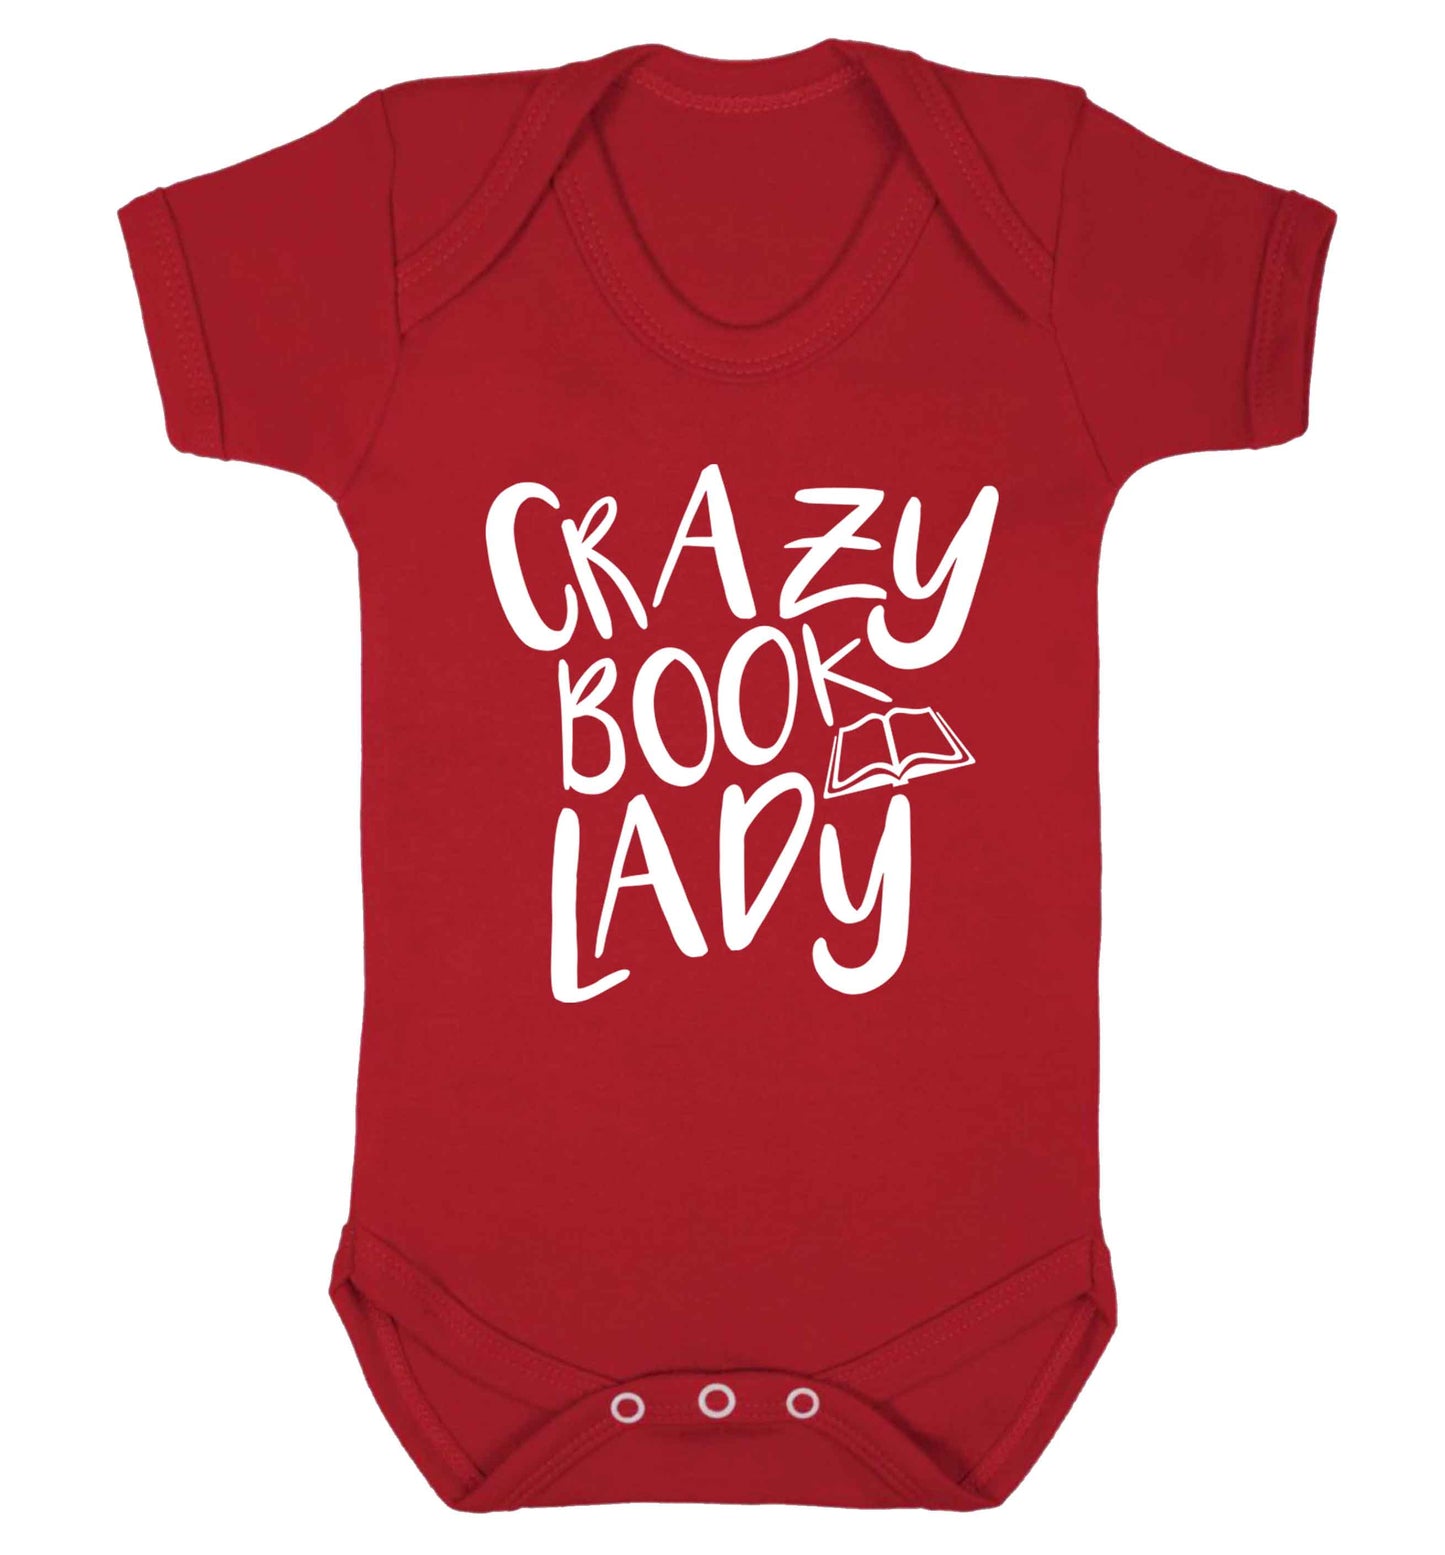 Crazy book lady Baby Vest red 18-24 months